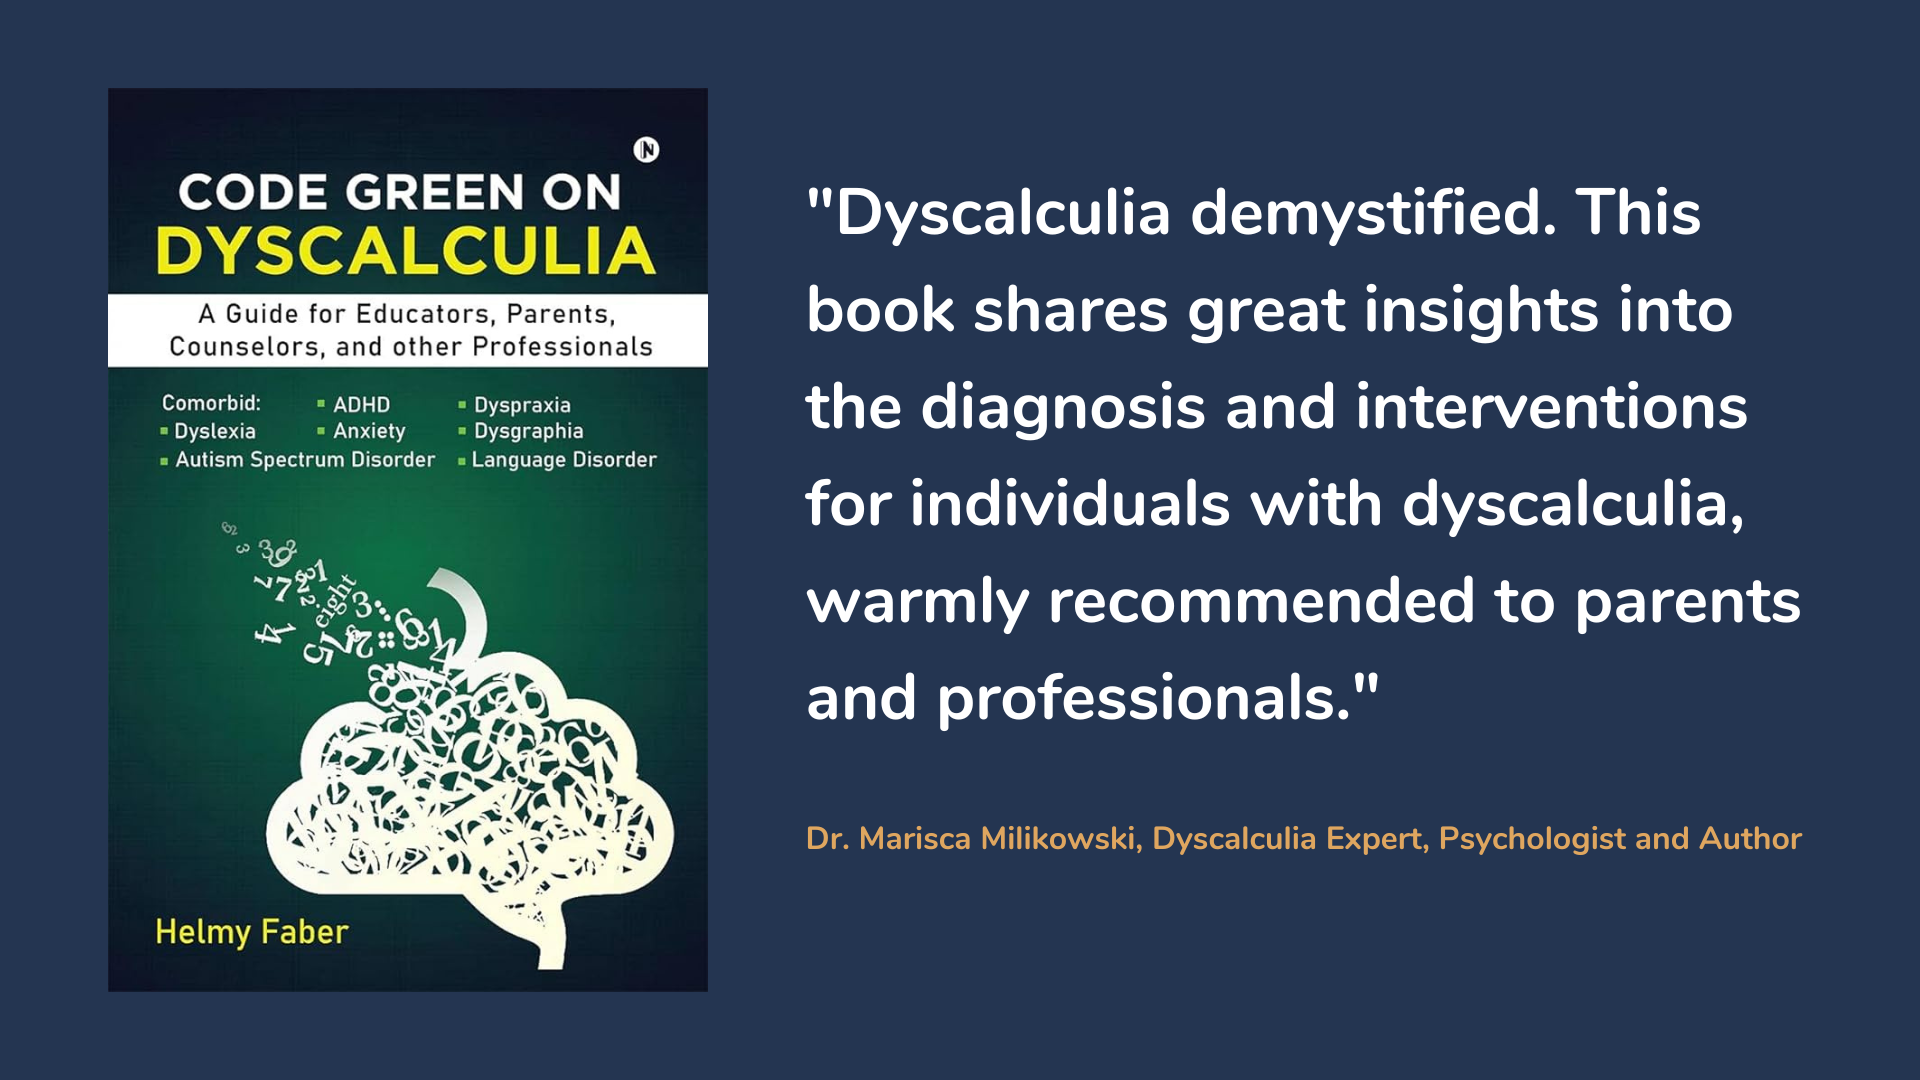 Code Green on Dyscalculia. Book cover and book review quote.